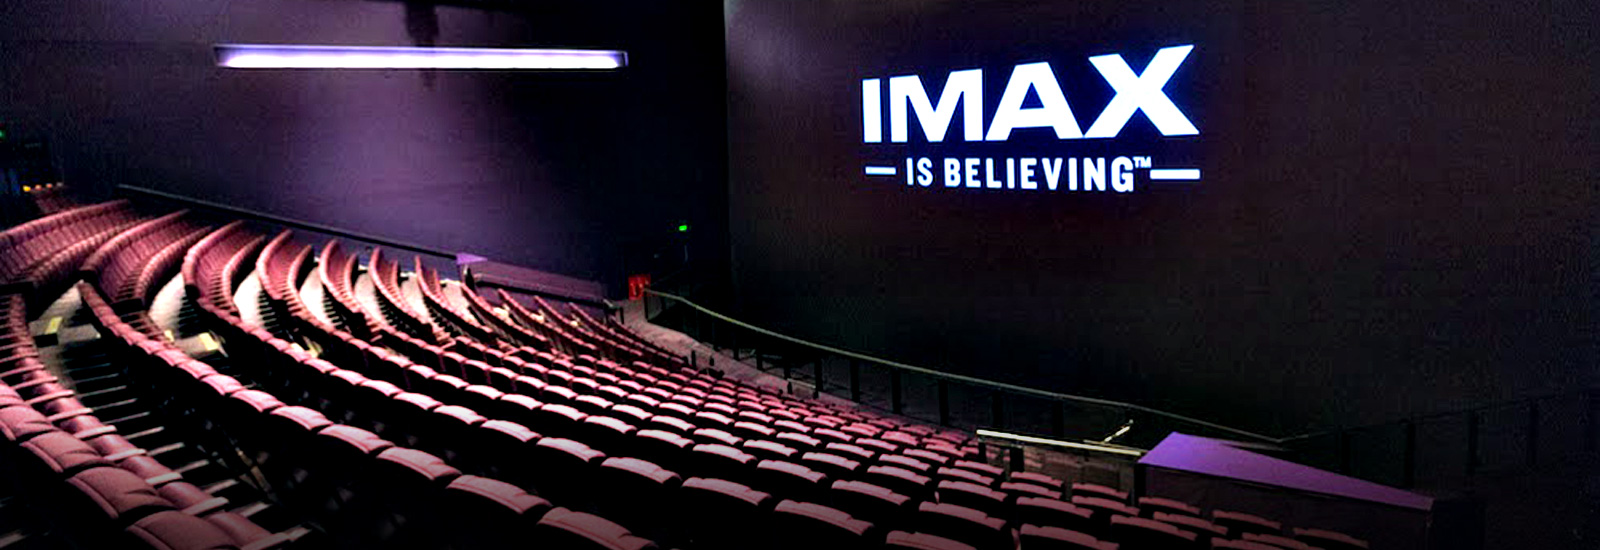 Empty IMAX Theatre displaying 'IMAX is believeing' on the IMAX screen